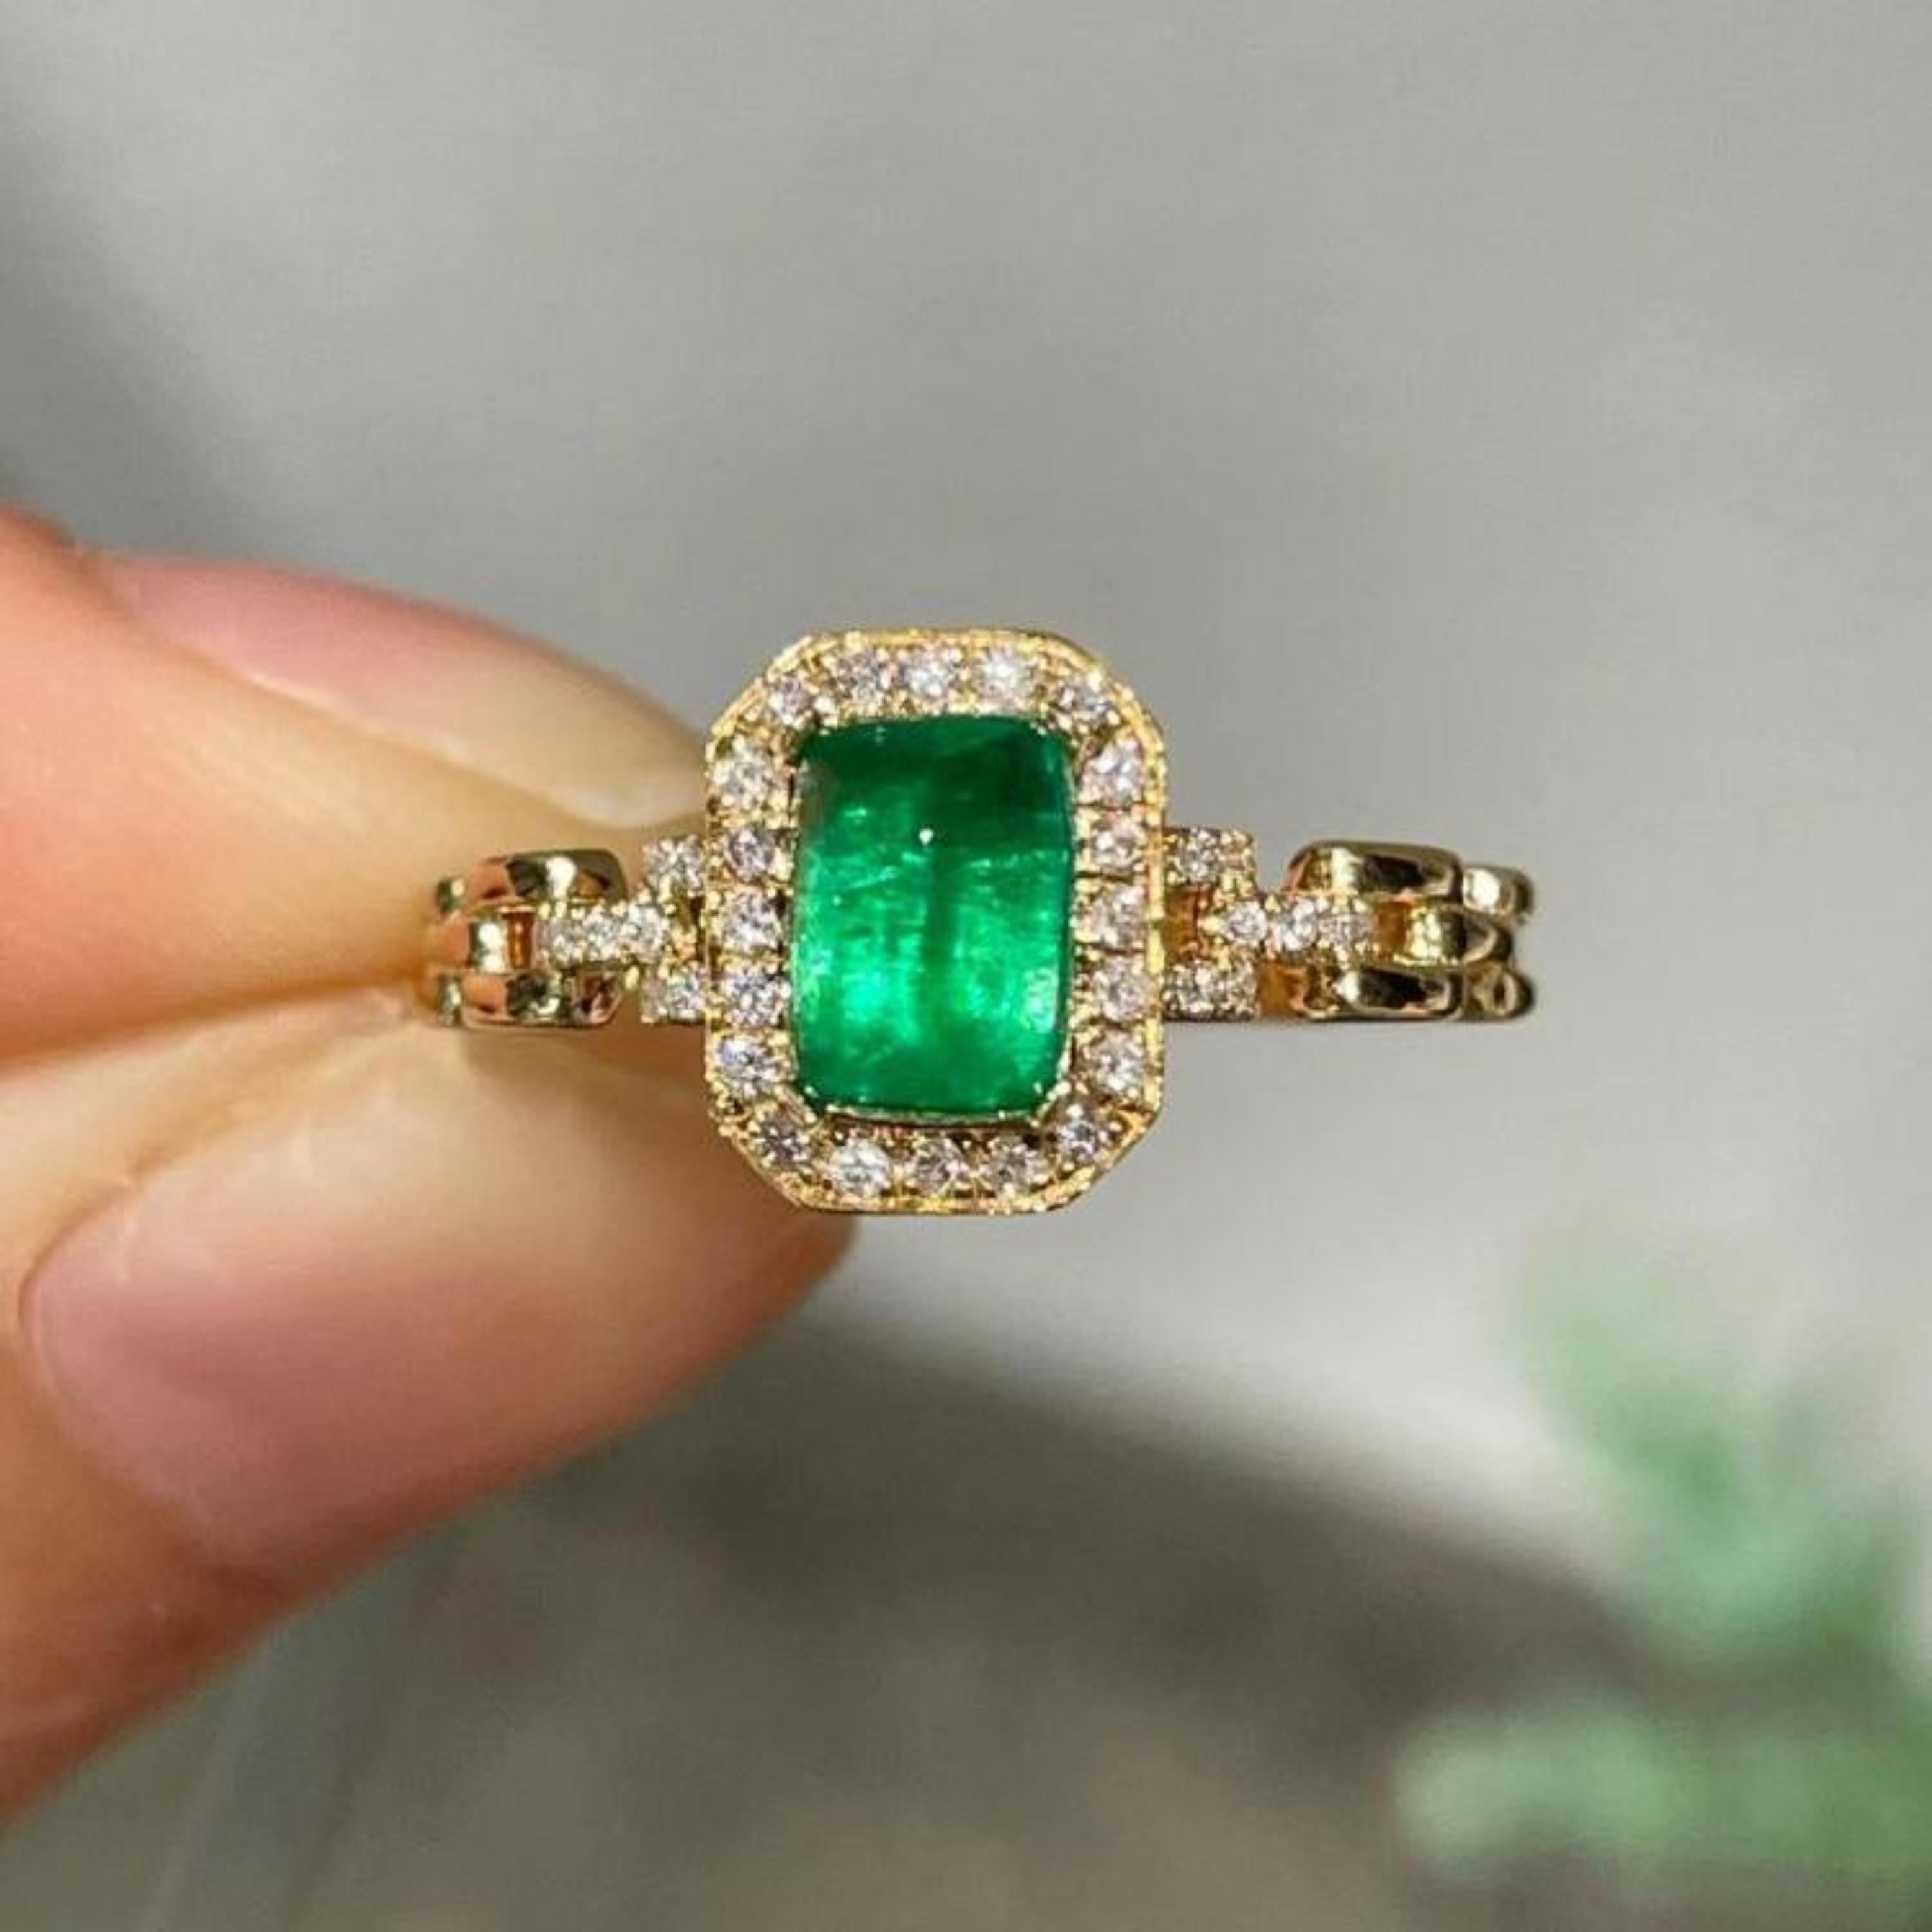 18K Gold 1 CT Natural Emerald and Diamond Antique Art Deco Style Engagement Ring

A stunning ring featuring IGI/GIA Certified 1.12 Carat Natural Emerald and 0.21 Carat of Diamond Accents set in 18K Solid Gold.

Emeralds are highly valued for their